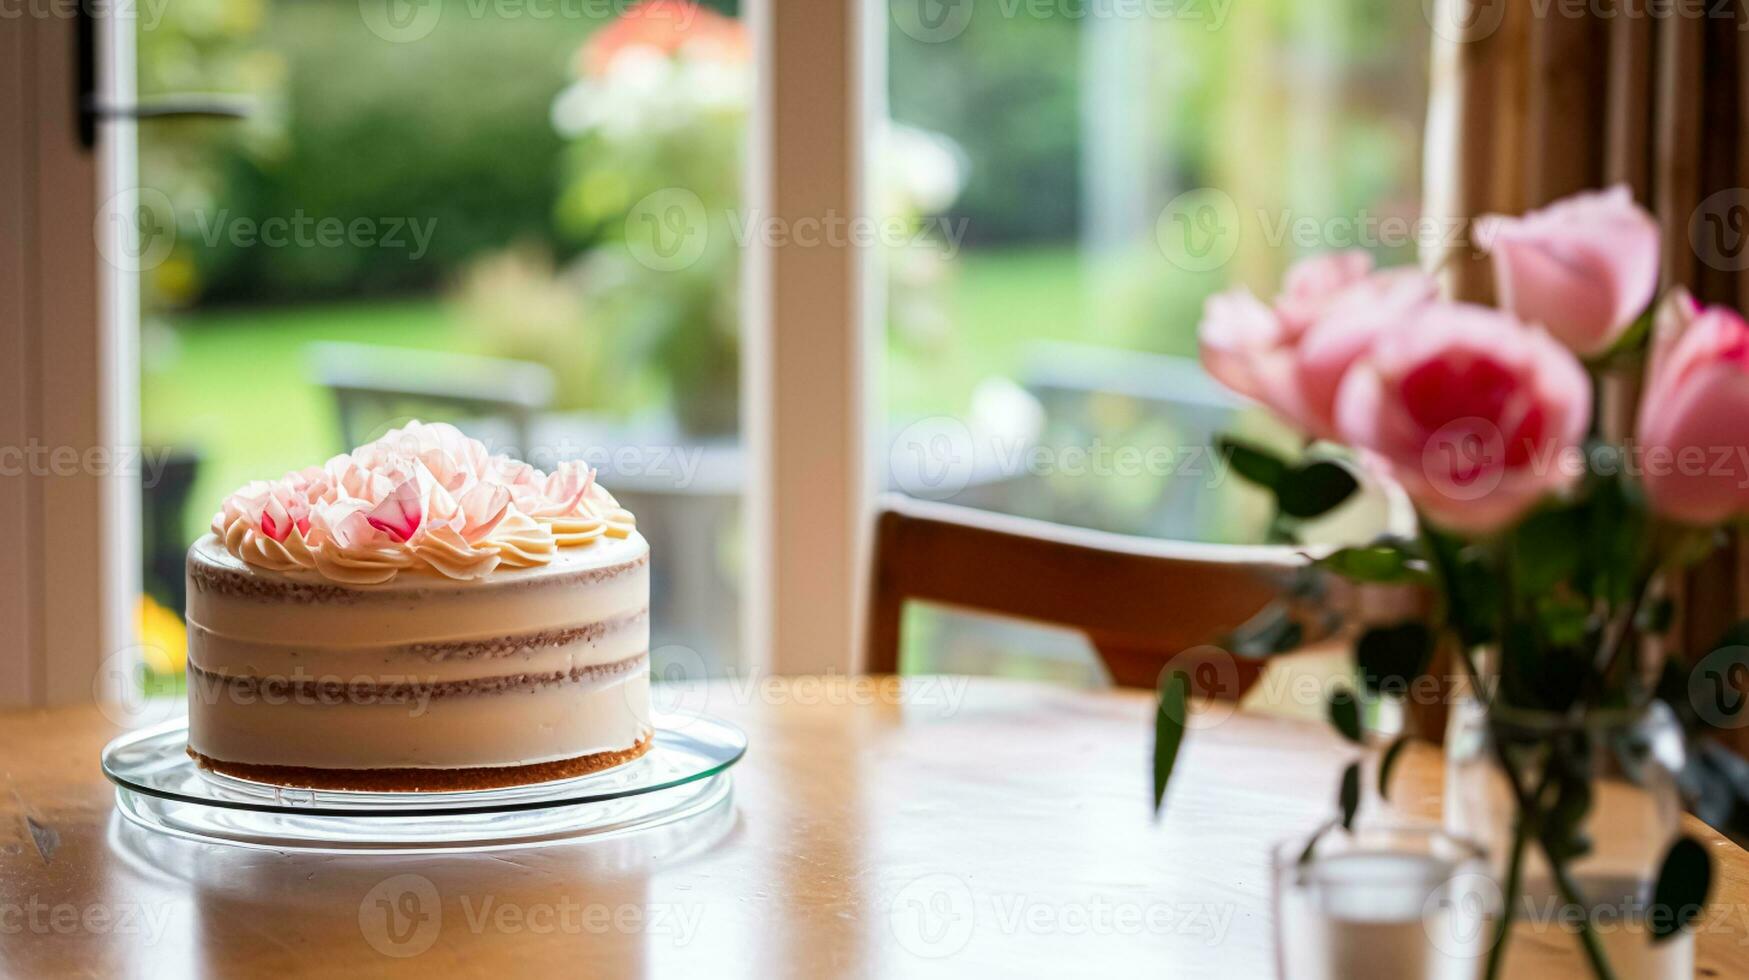 Homemade birthday cake in the English countryside house, cottage kitchen food and holiday baking recipe photo